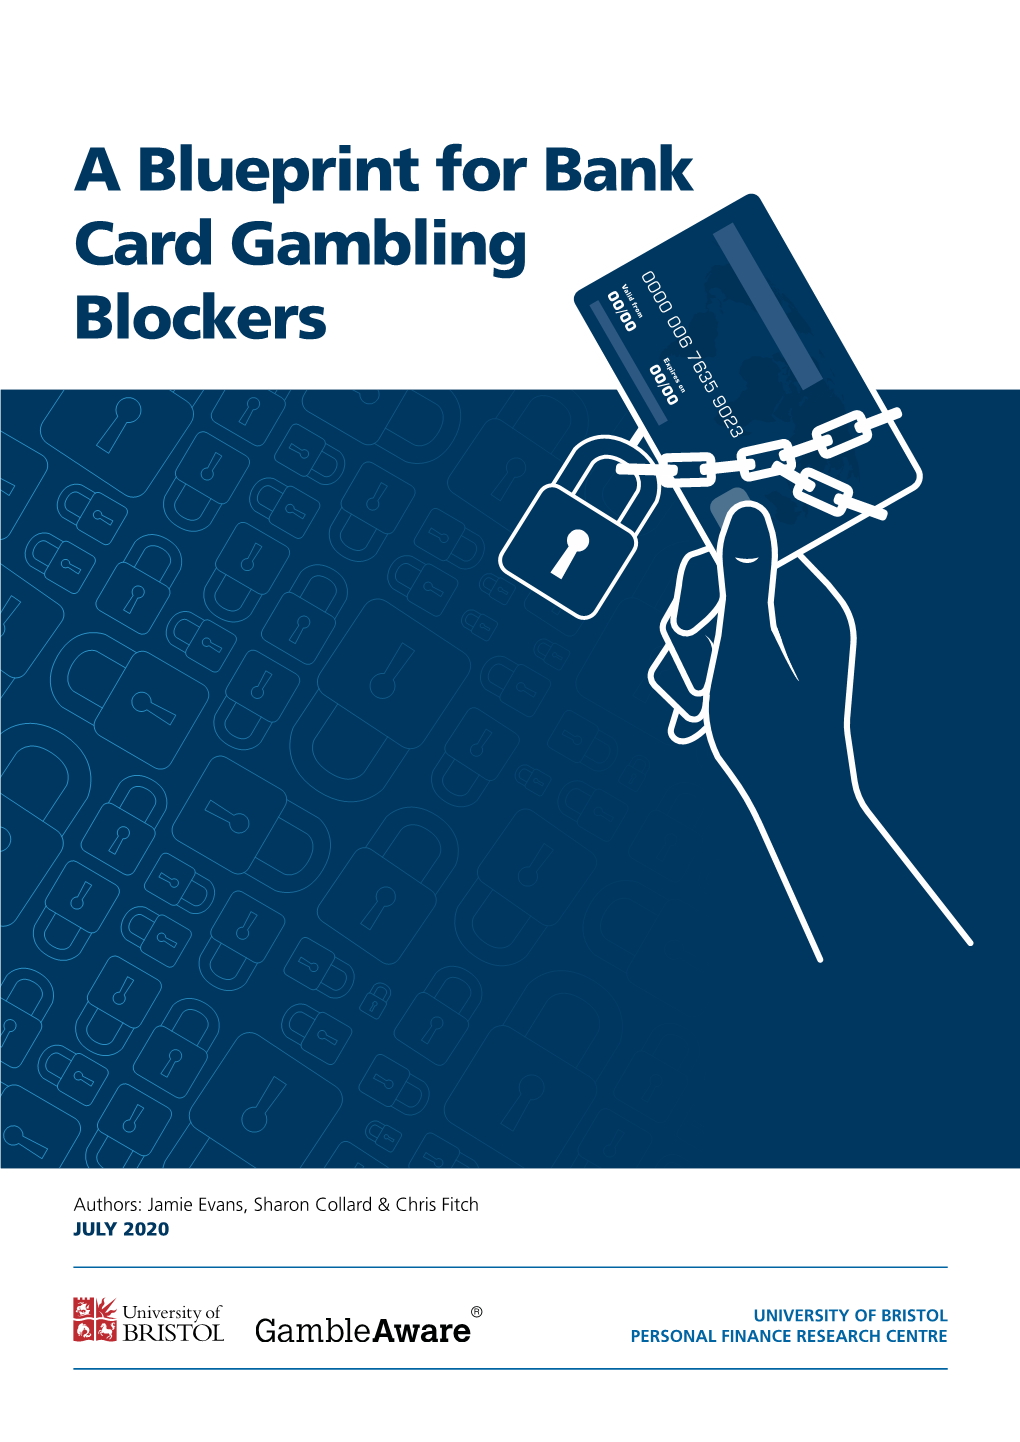 A Blueprint for Bank Card Gambling Blockers 3 Finding 1: Blocker Technology Works and Should Be Available to All Card Users